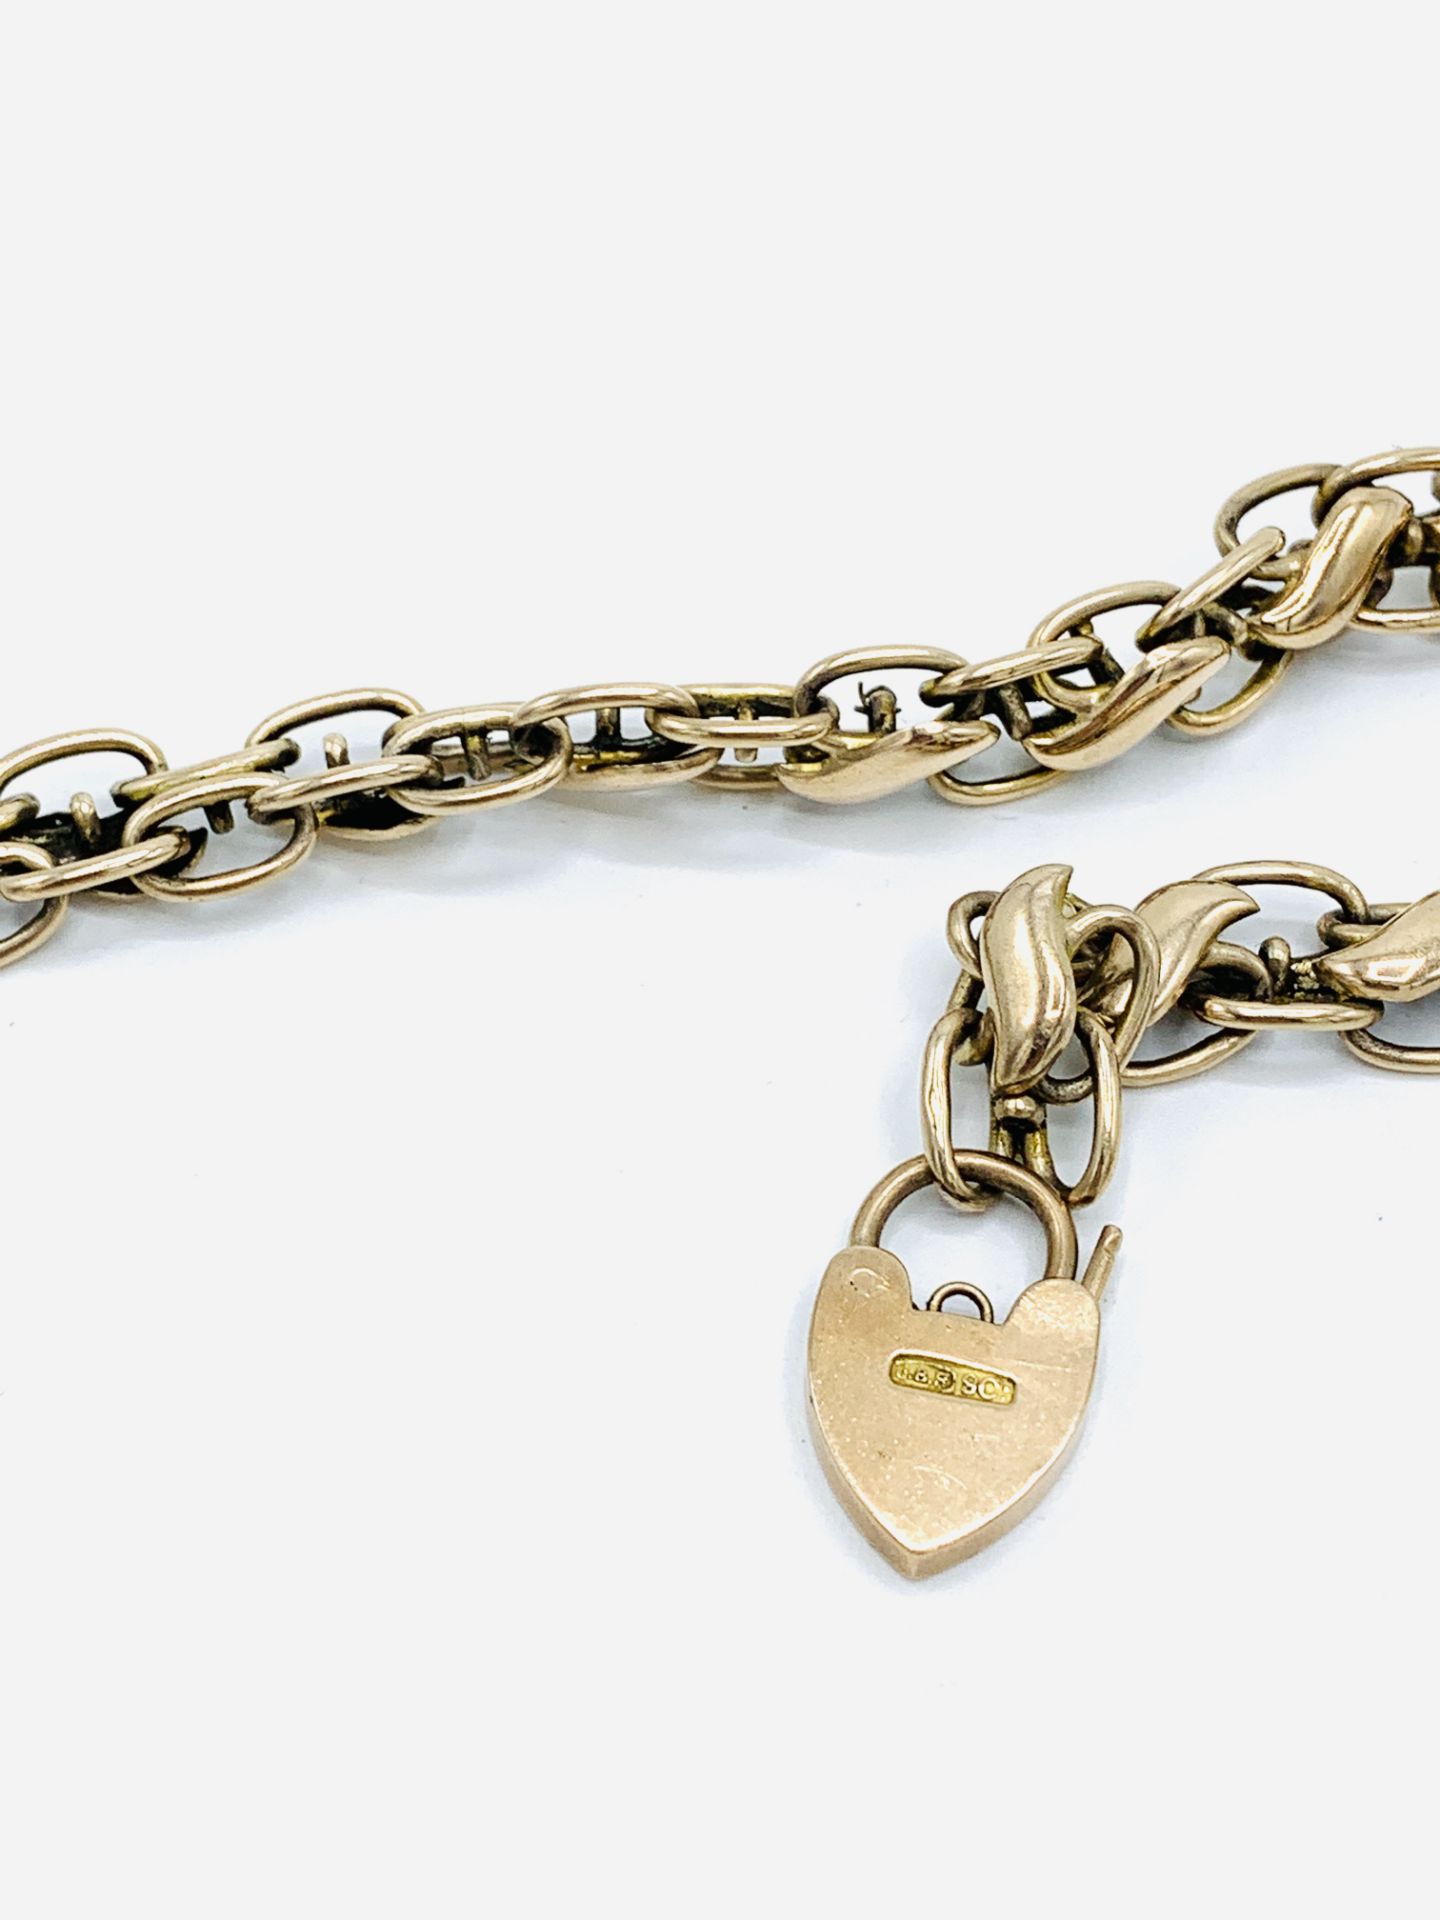 9ct gold link bracelet with padlock, requires repair. - Image 4 of 4